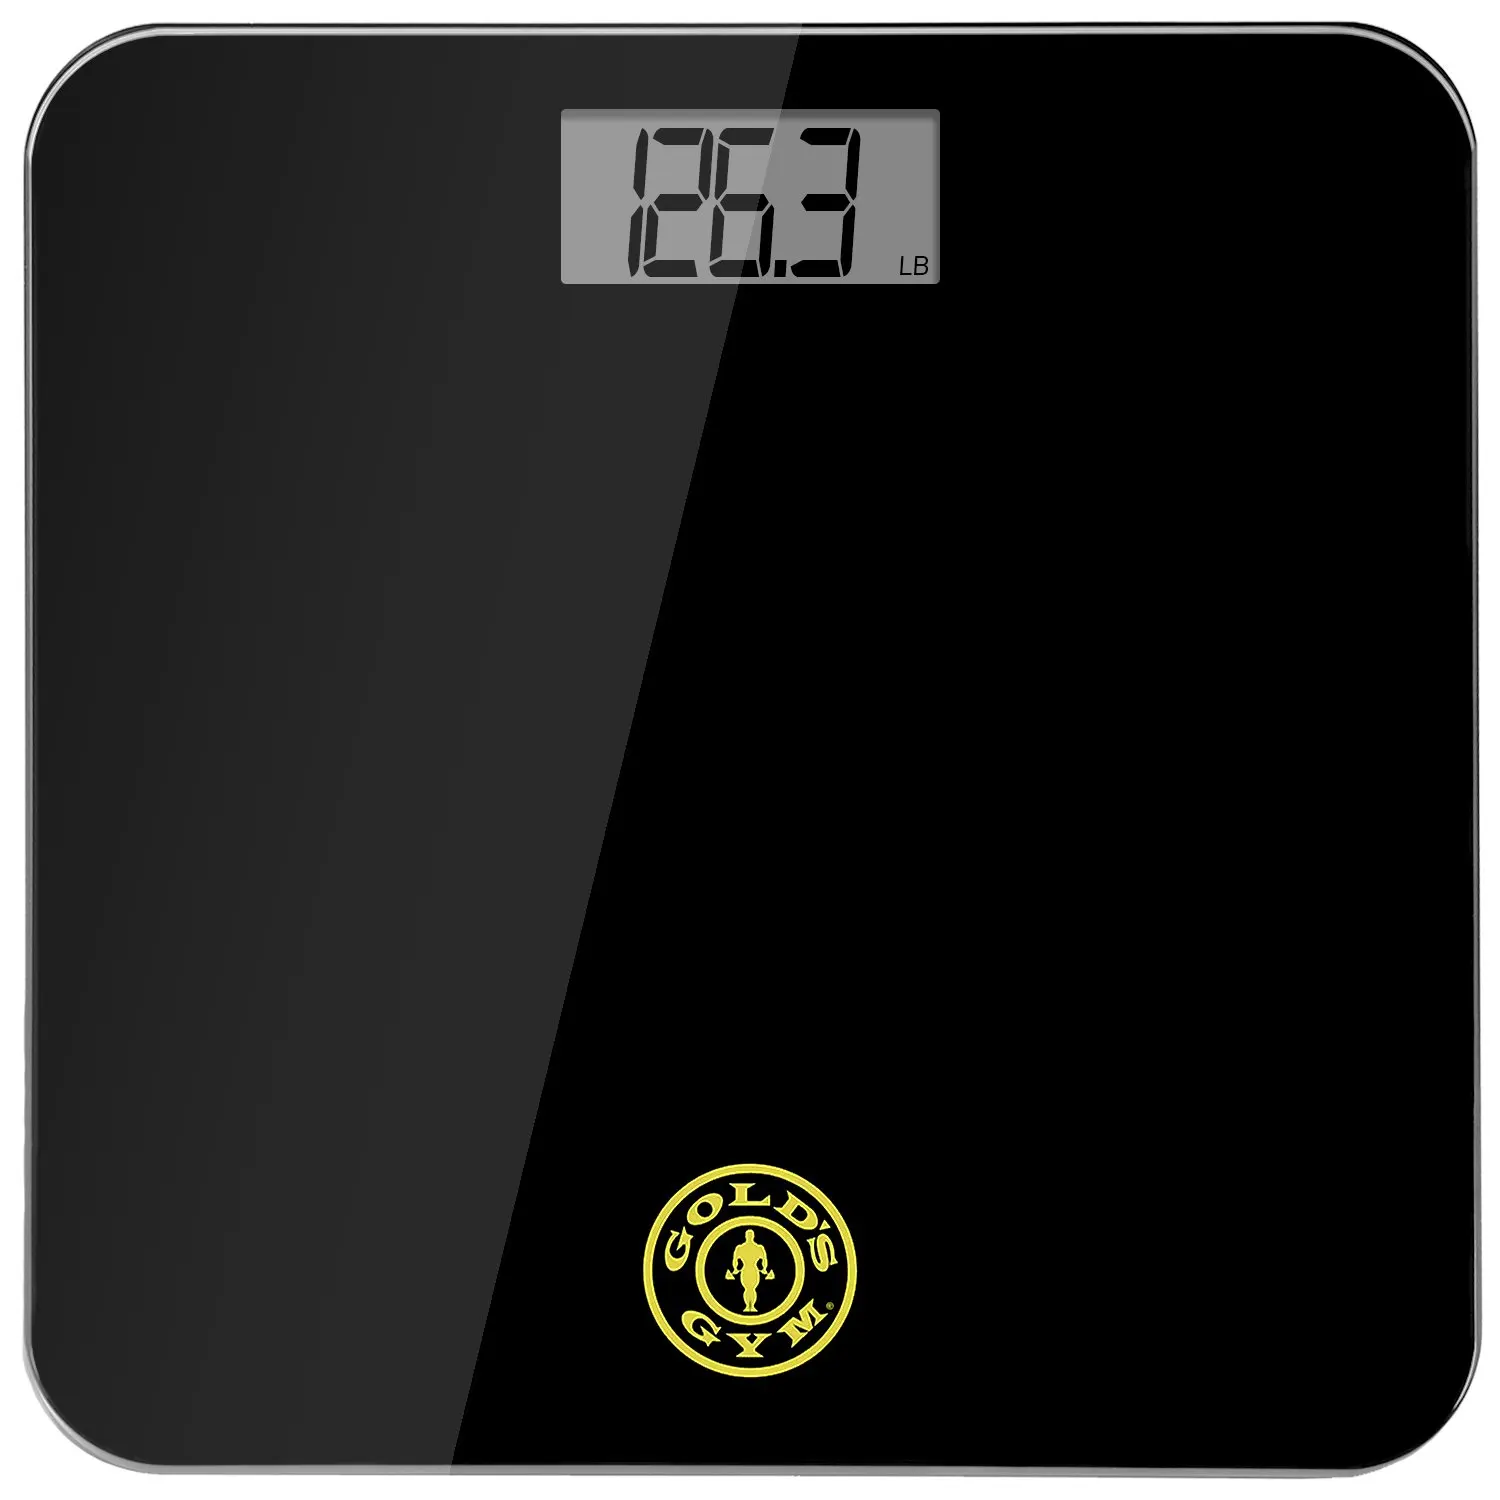 weight scale deals